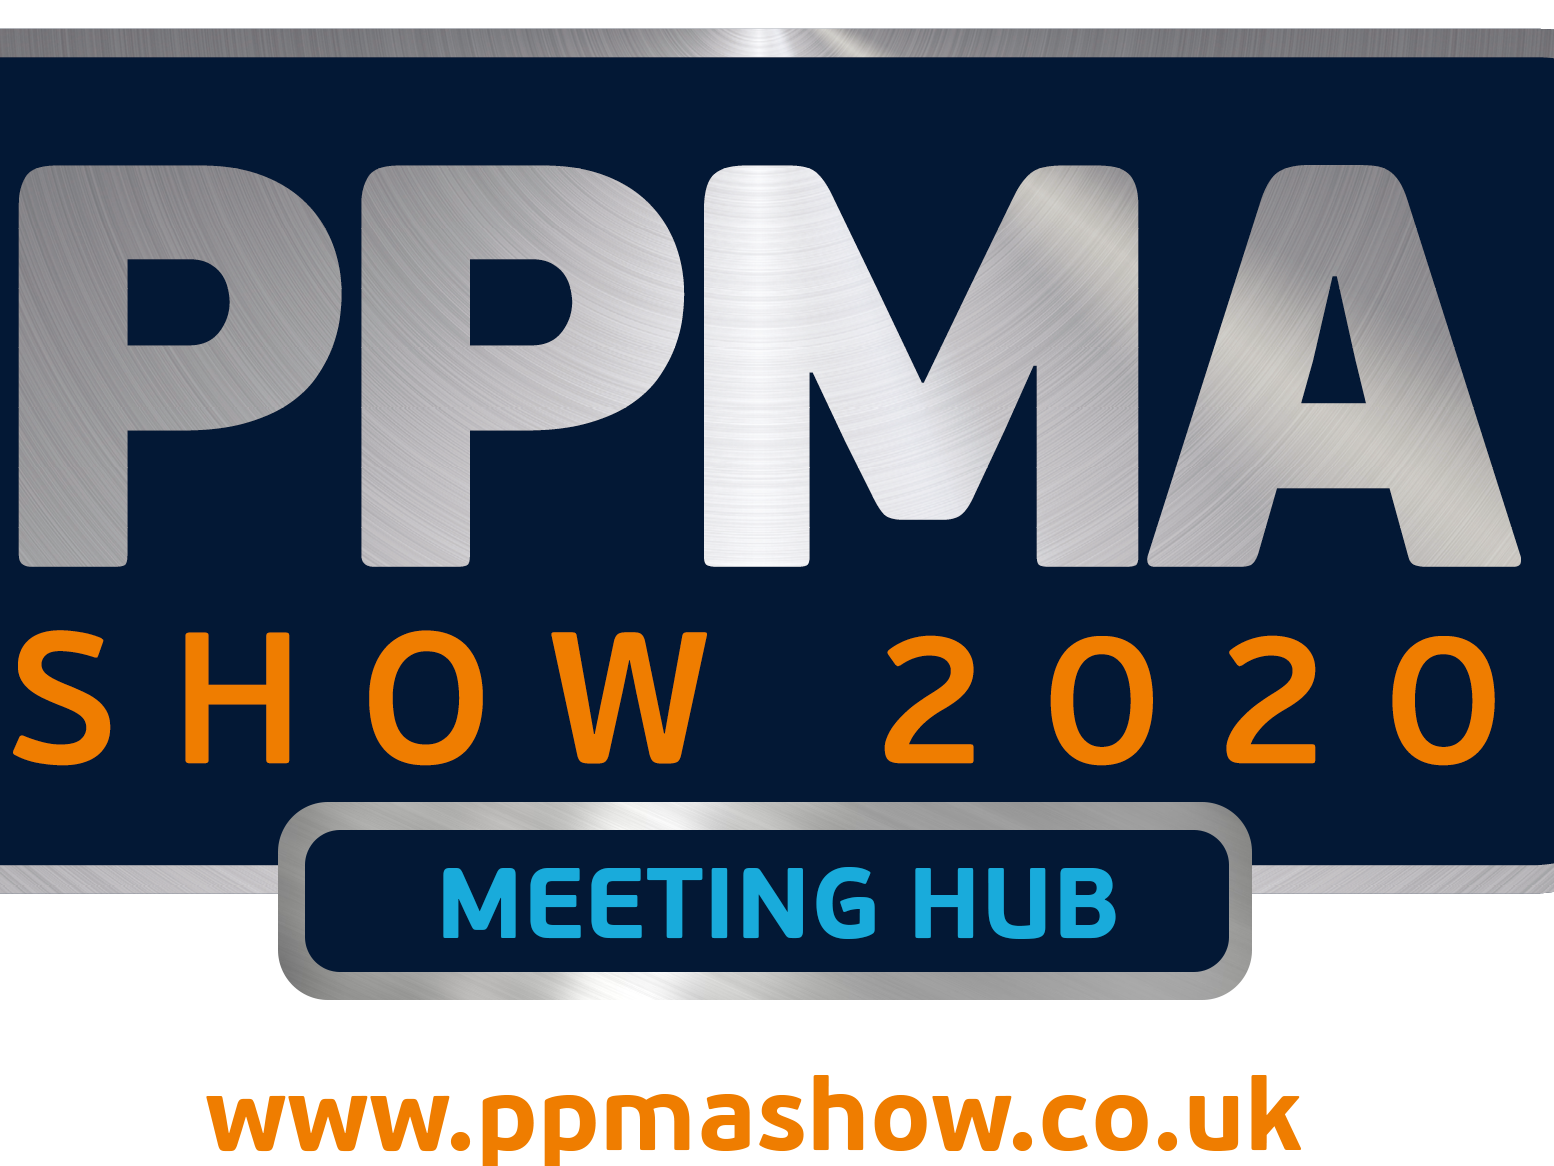 PPMA Show available online